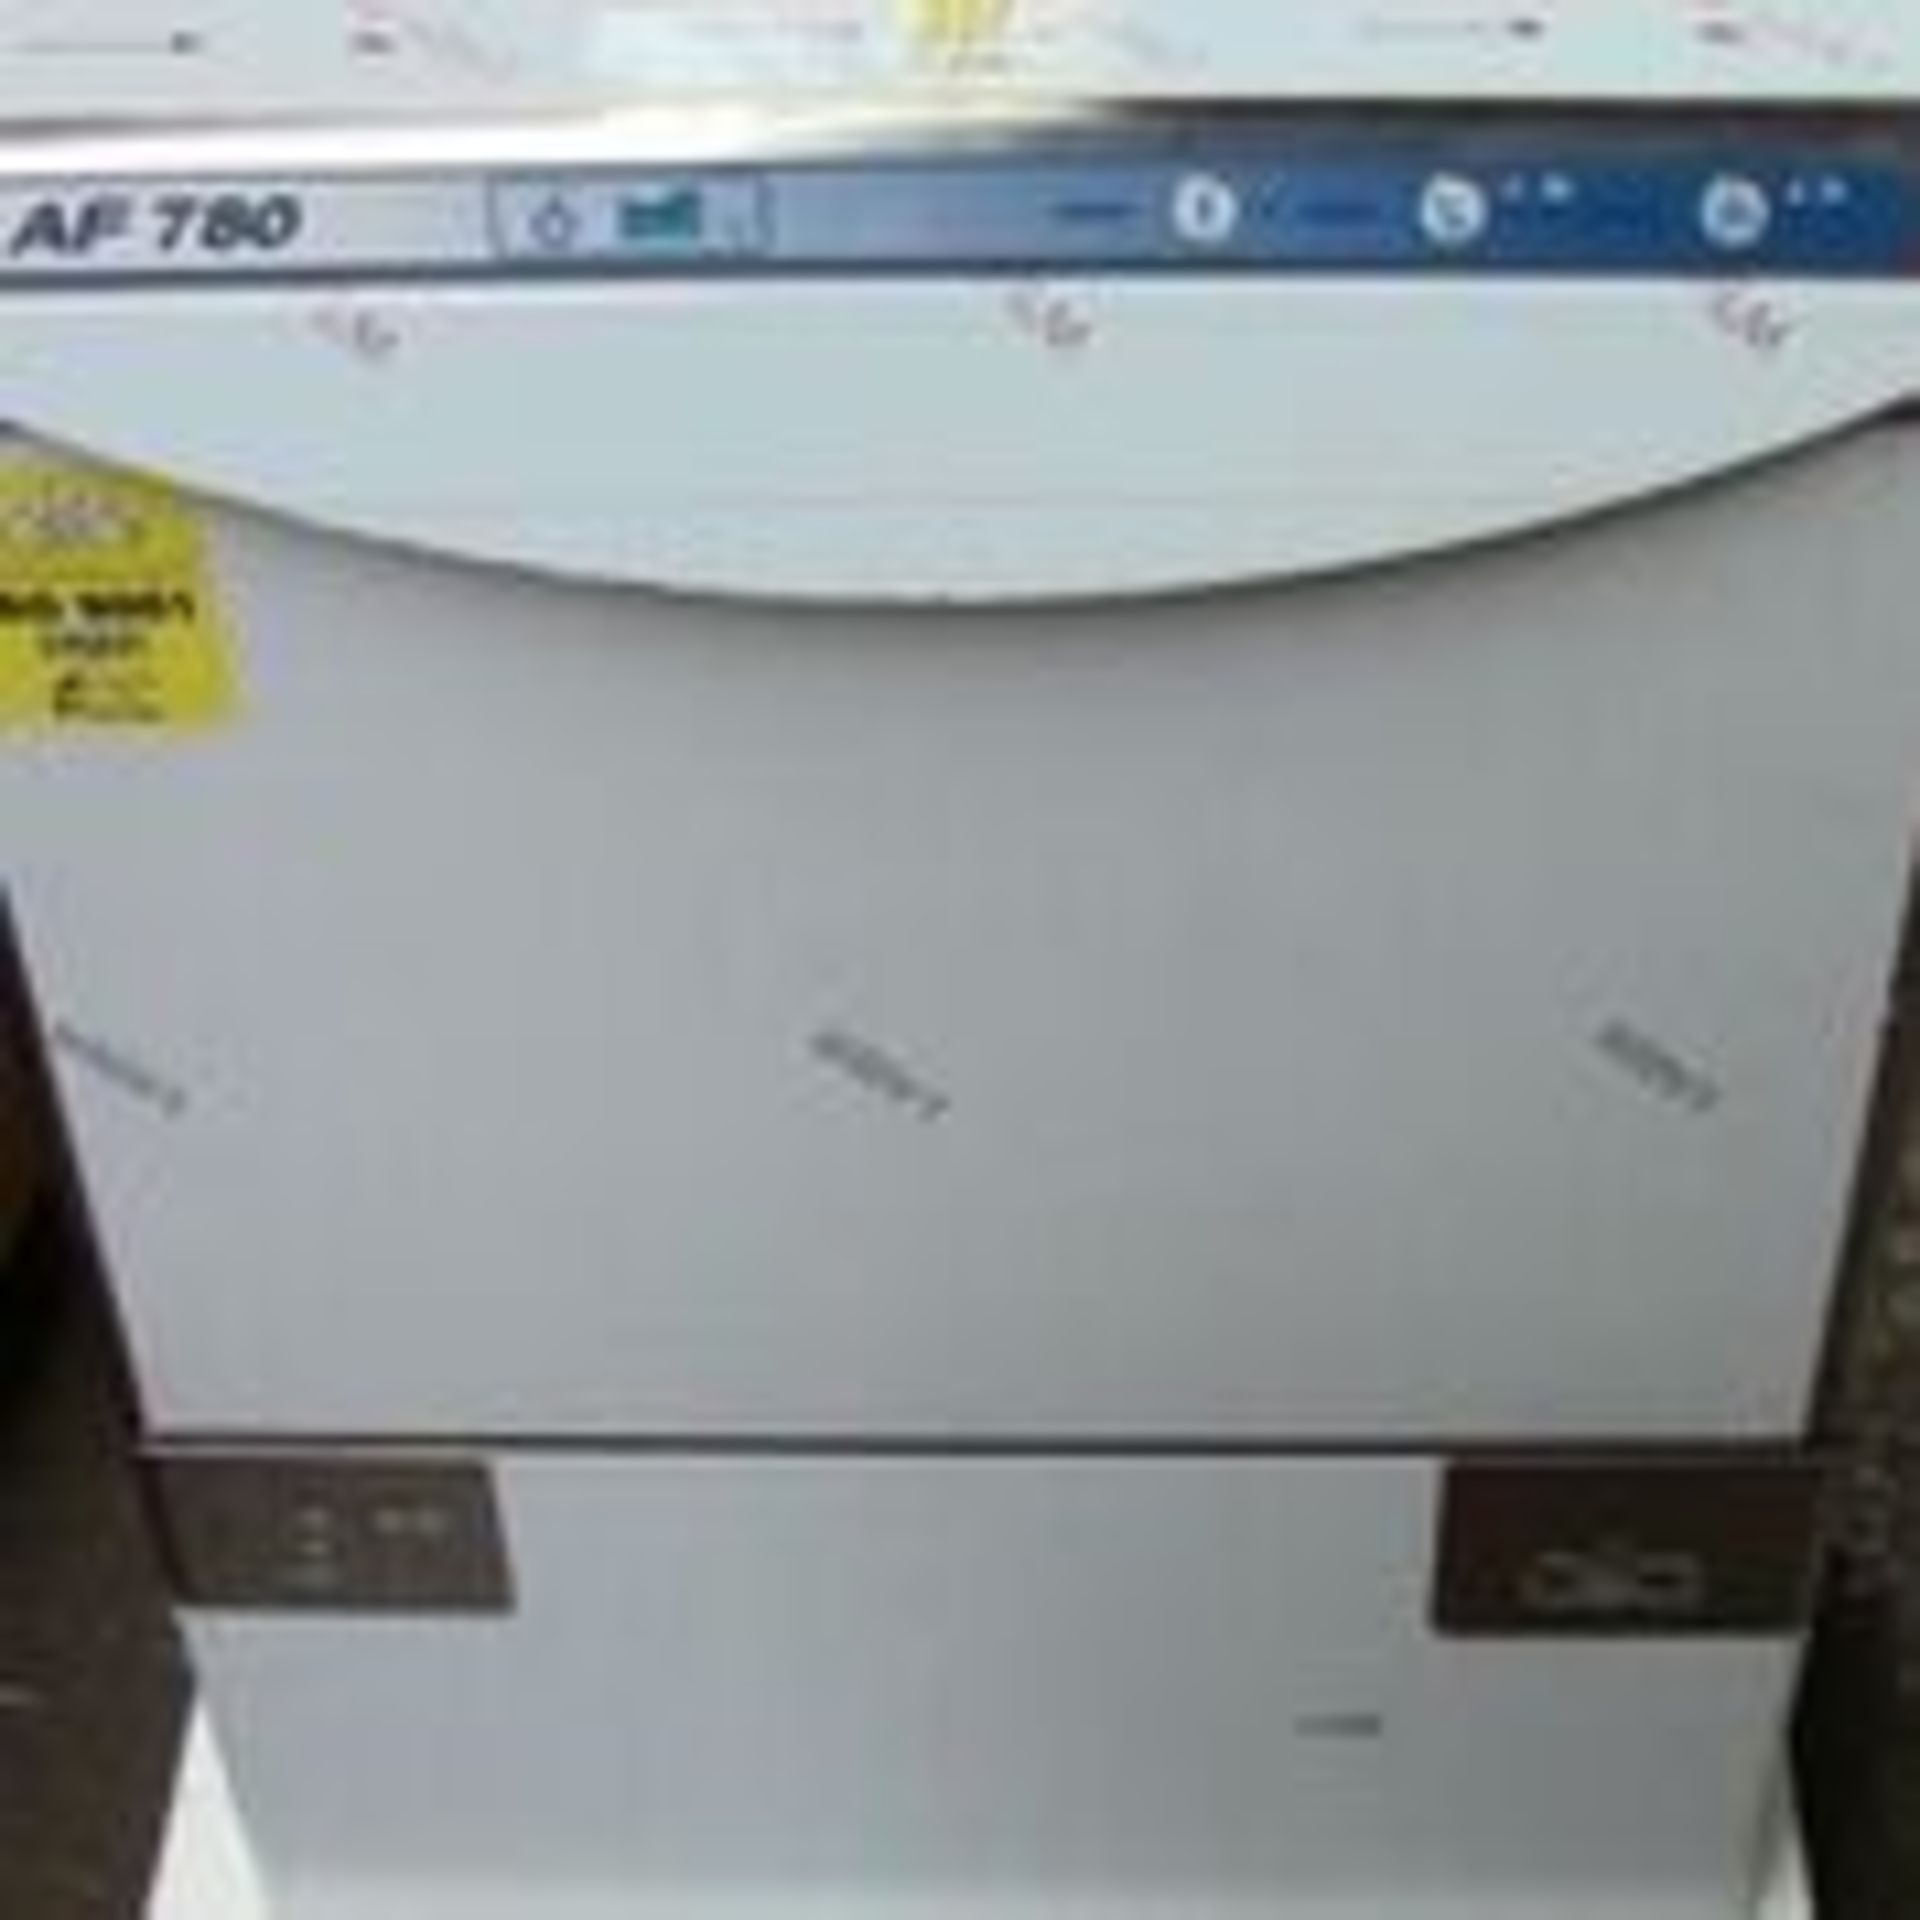 Undercounter Soft Touch Dishwasher 500 Basket With Drain Pump and Break Tank, 75-150 Seconds Cycle,